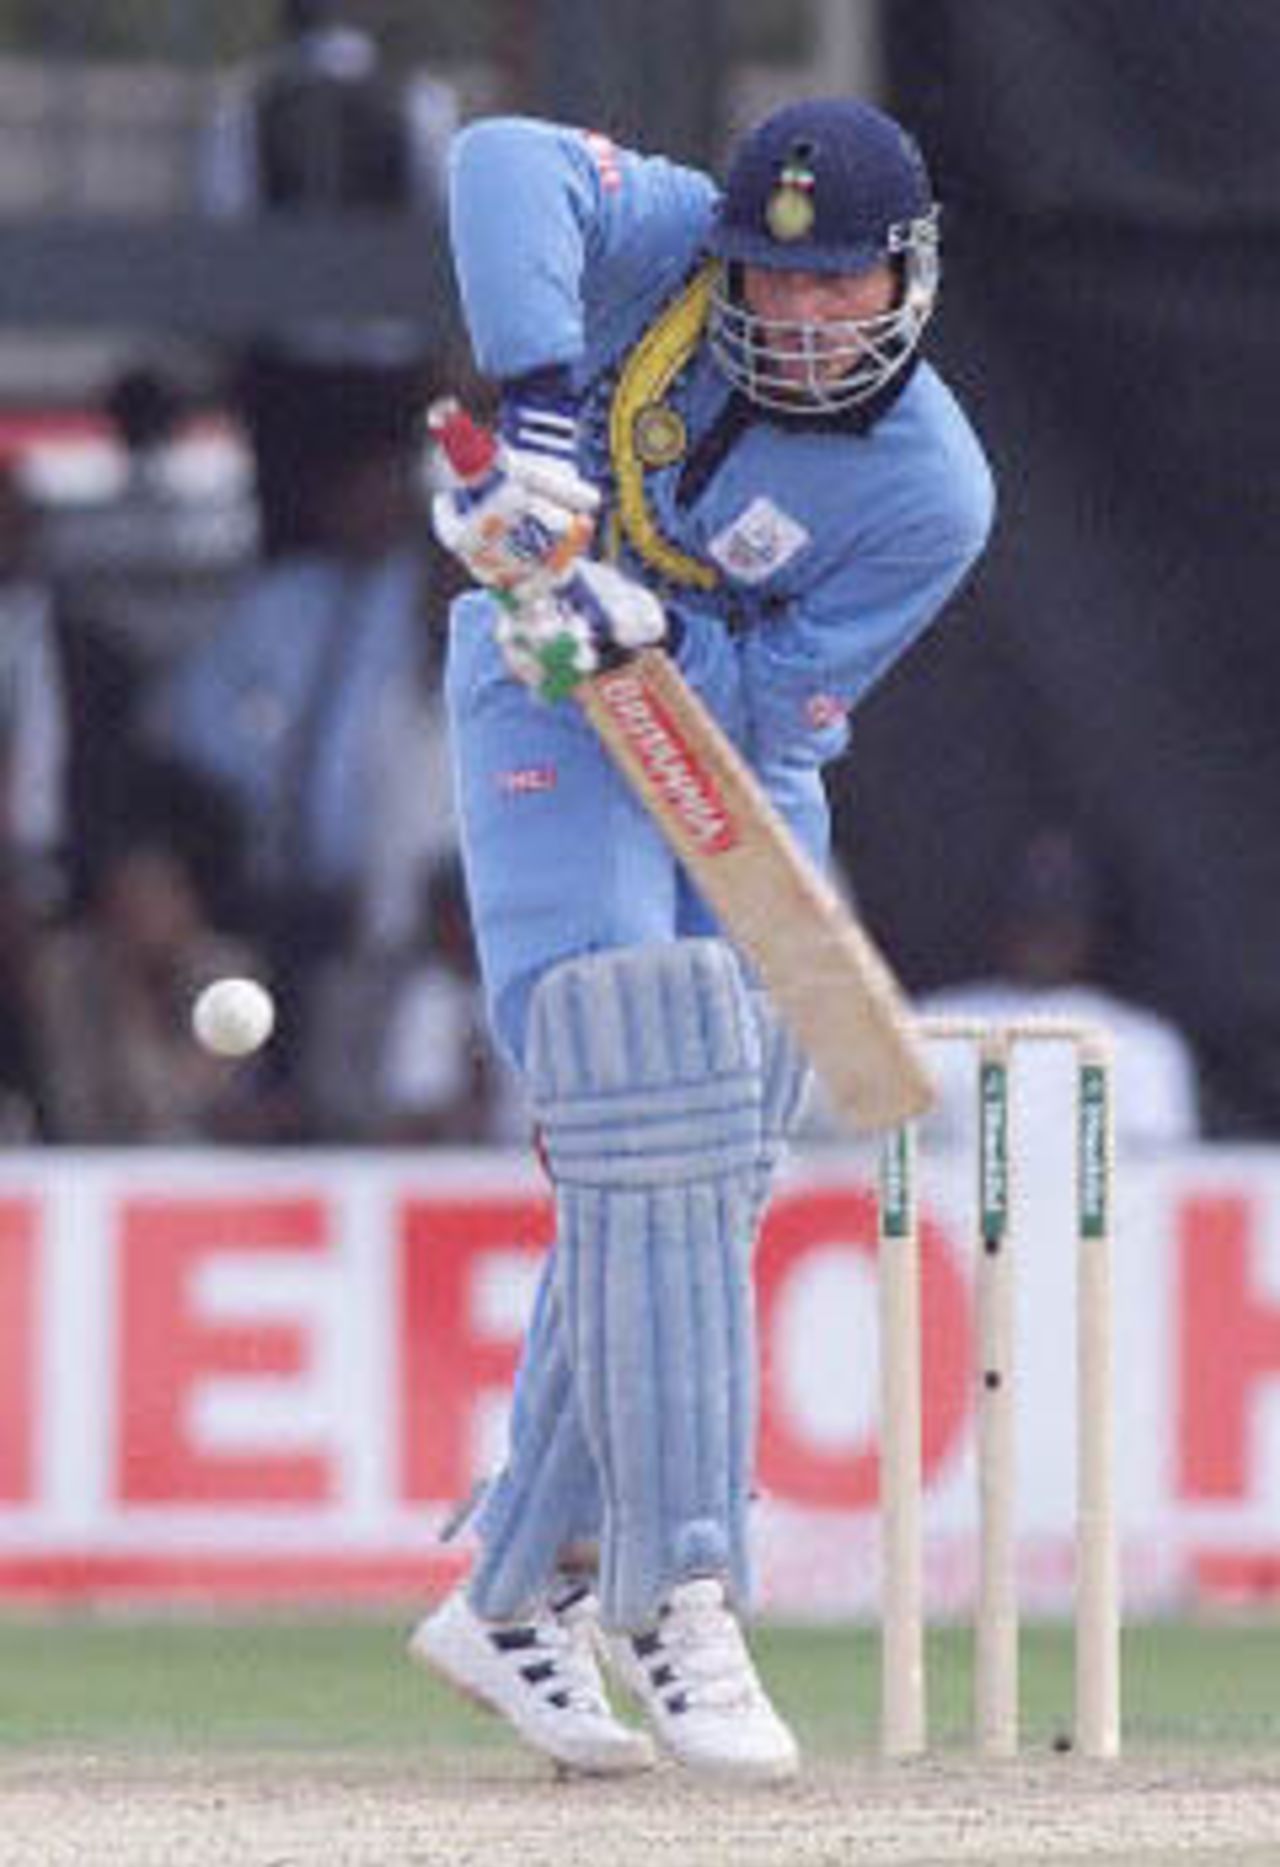 India's Captain Sourav Ganguly about to flick the ball of his pads during India's opening game against Kenya in the ICC KnockOut. ICC KnockOut, 2000/01, Preliminary Quarter Final, Kenya v India, Gymkhana Club Ground, Nairobi, 3 October 2000.